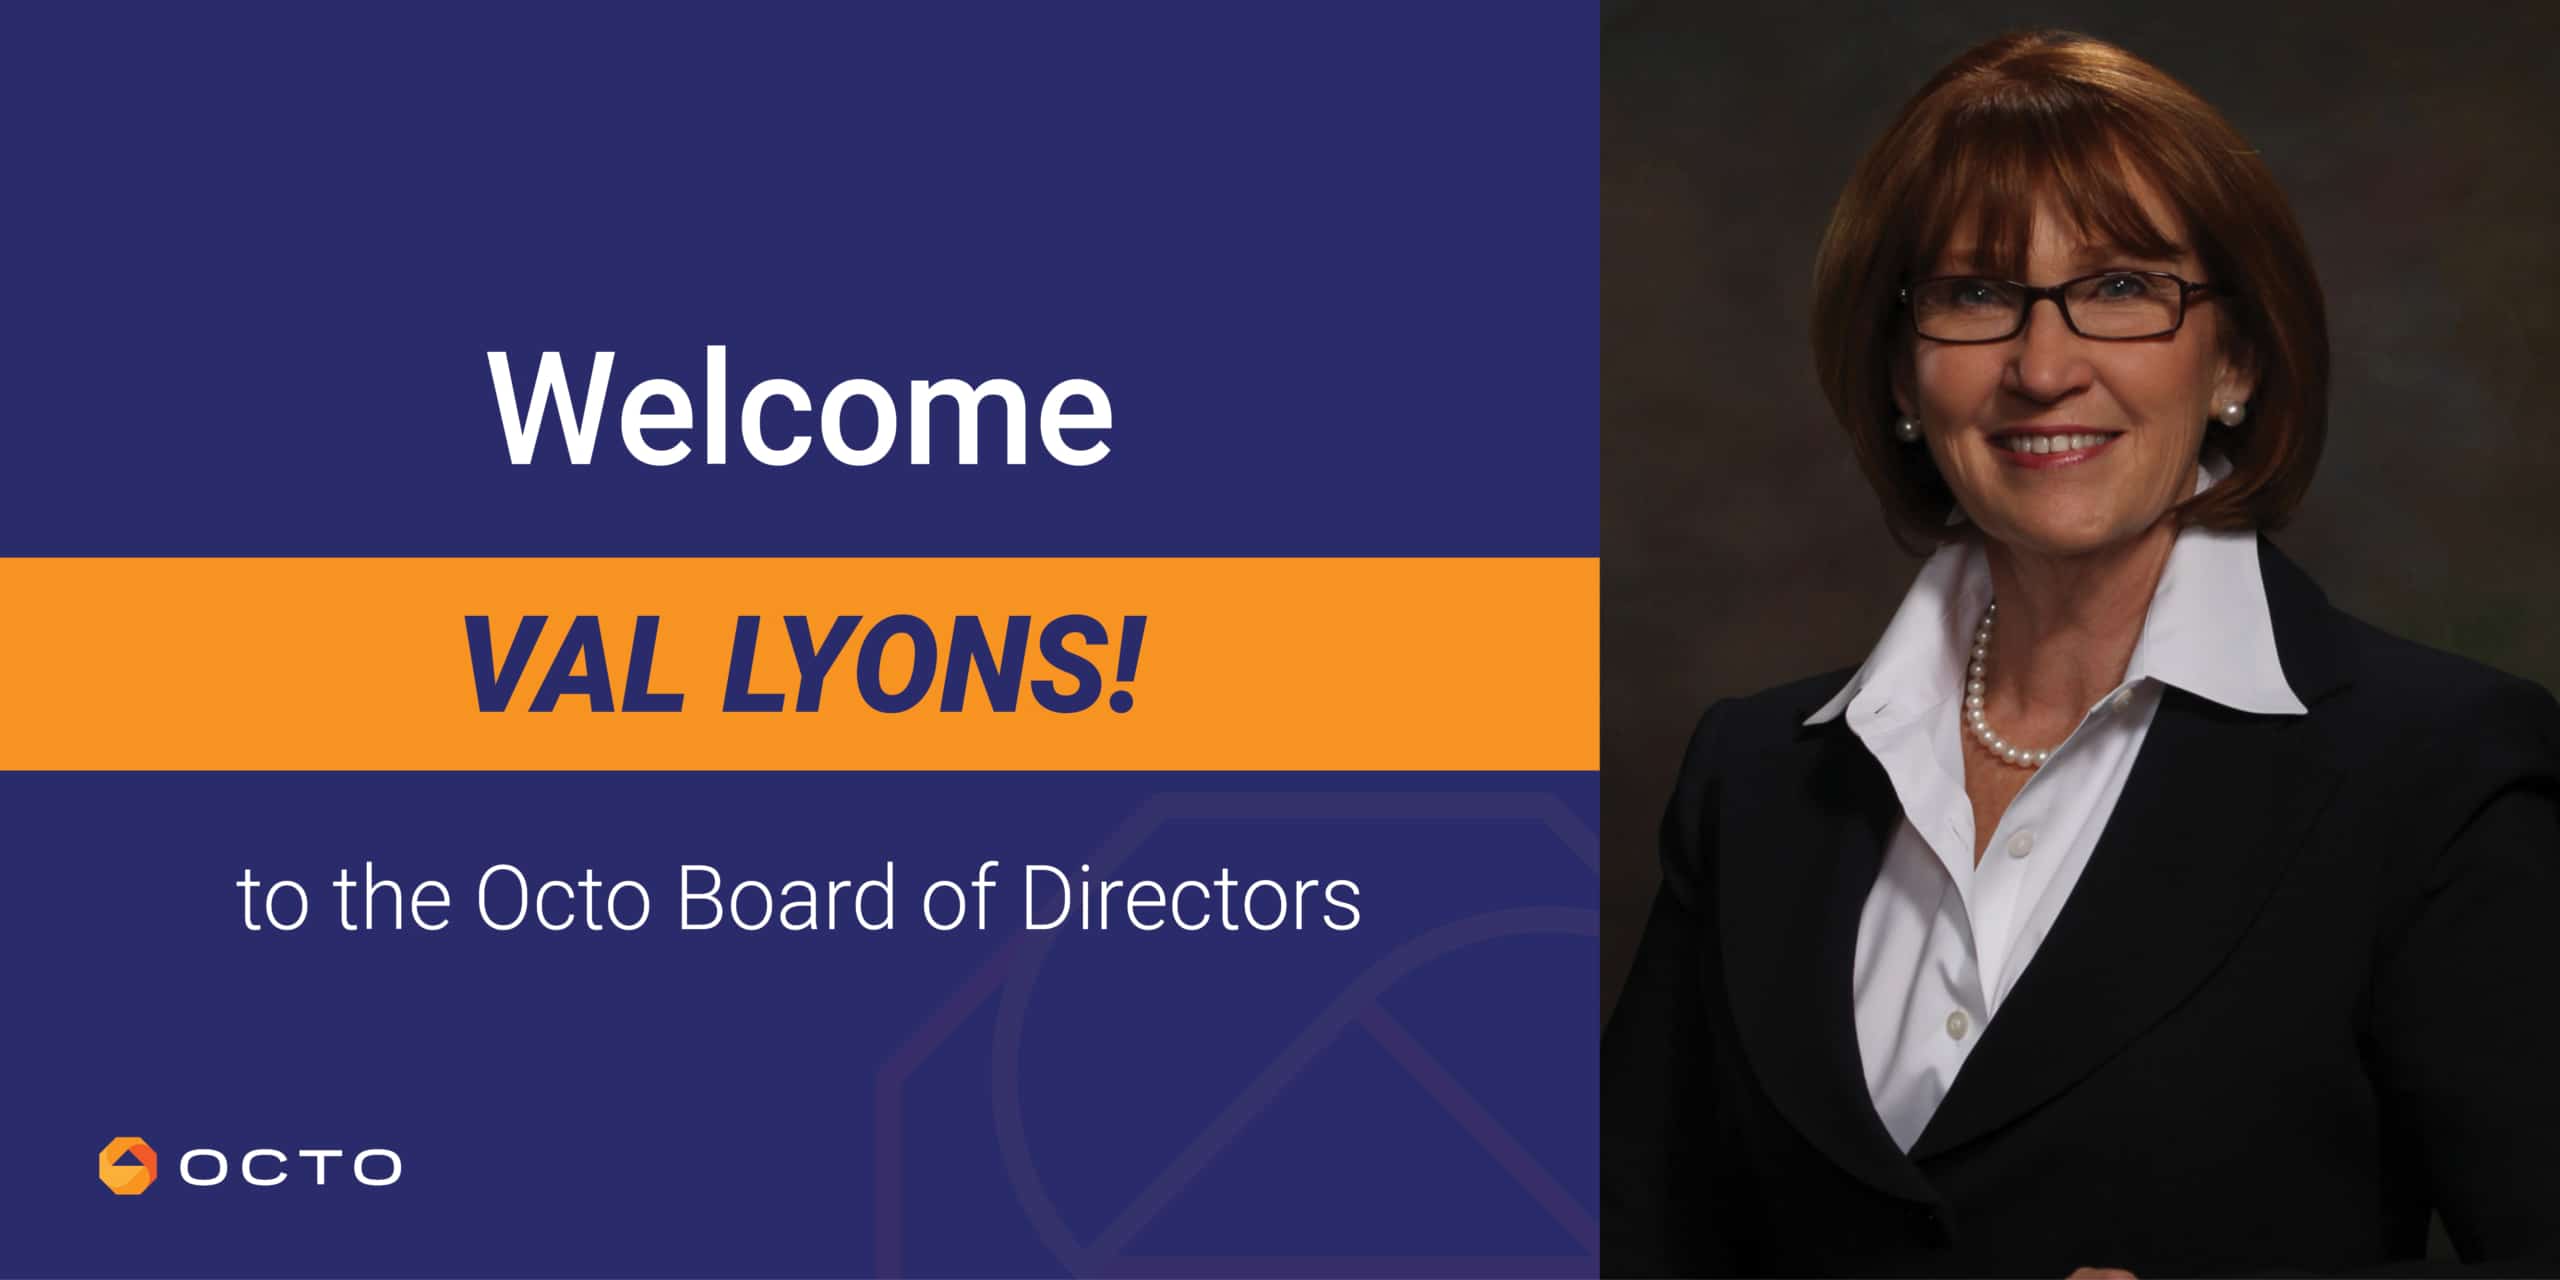 Welcome Val Lyons! to the Board of Directors